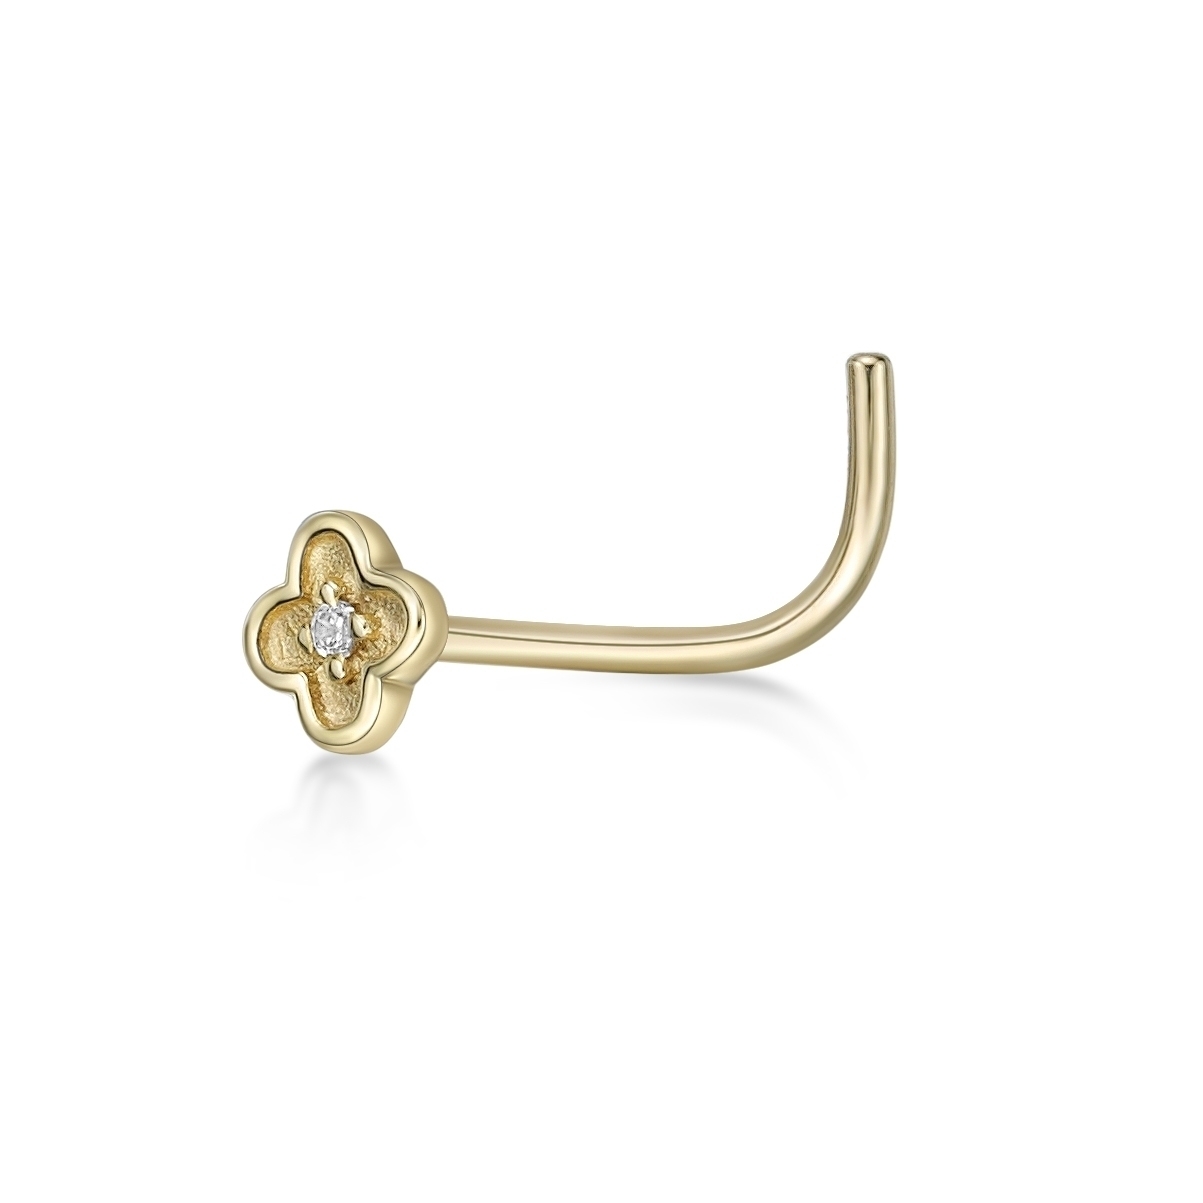 51254-nose-ring-default-collection-yellow-gold-cubic-zirconia-.jpg